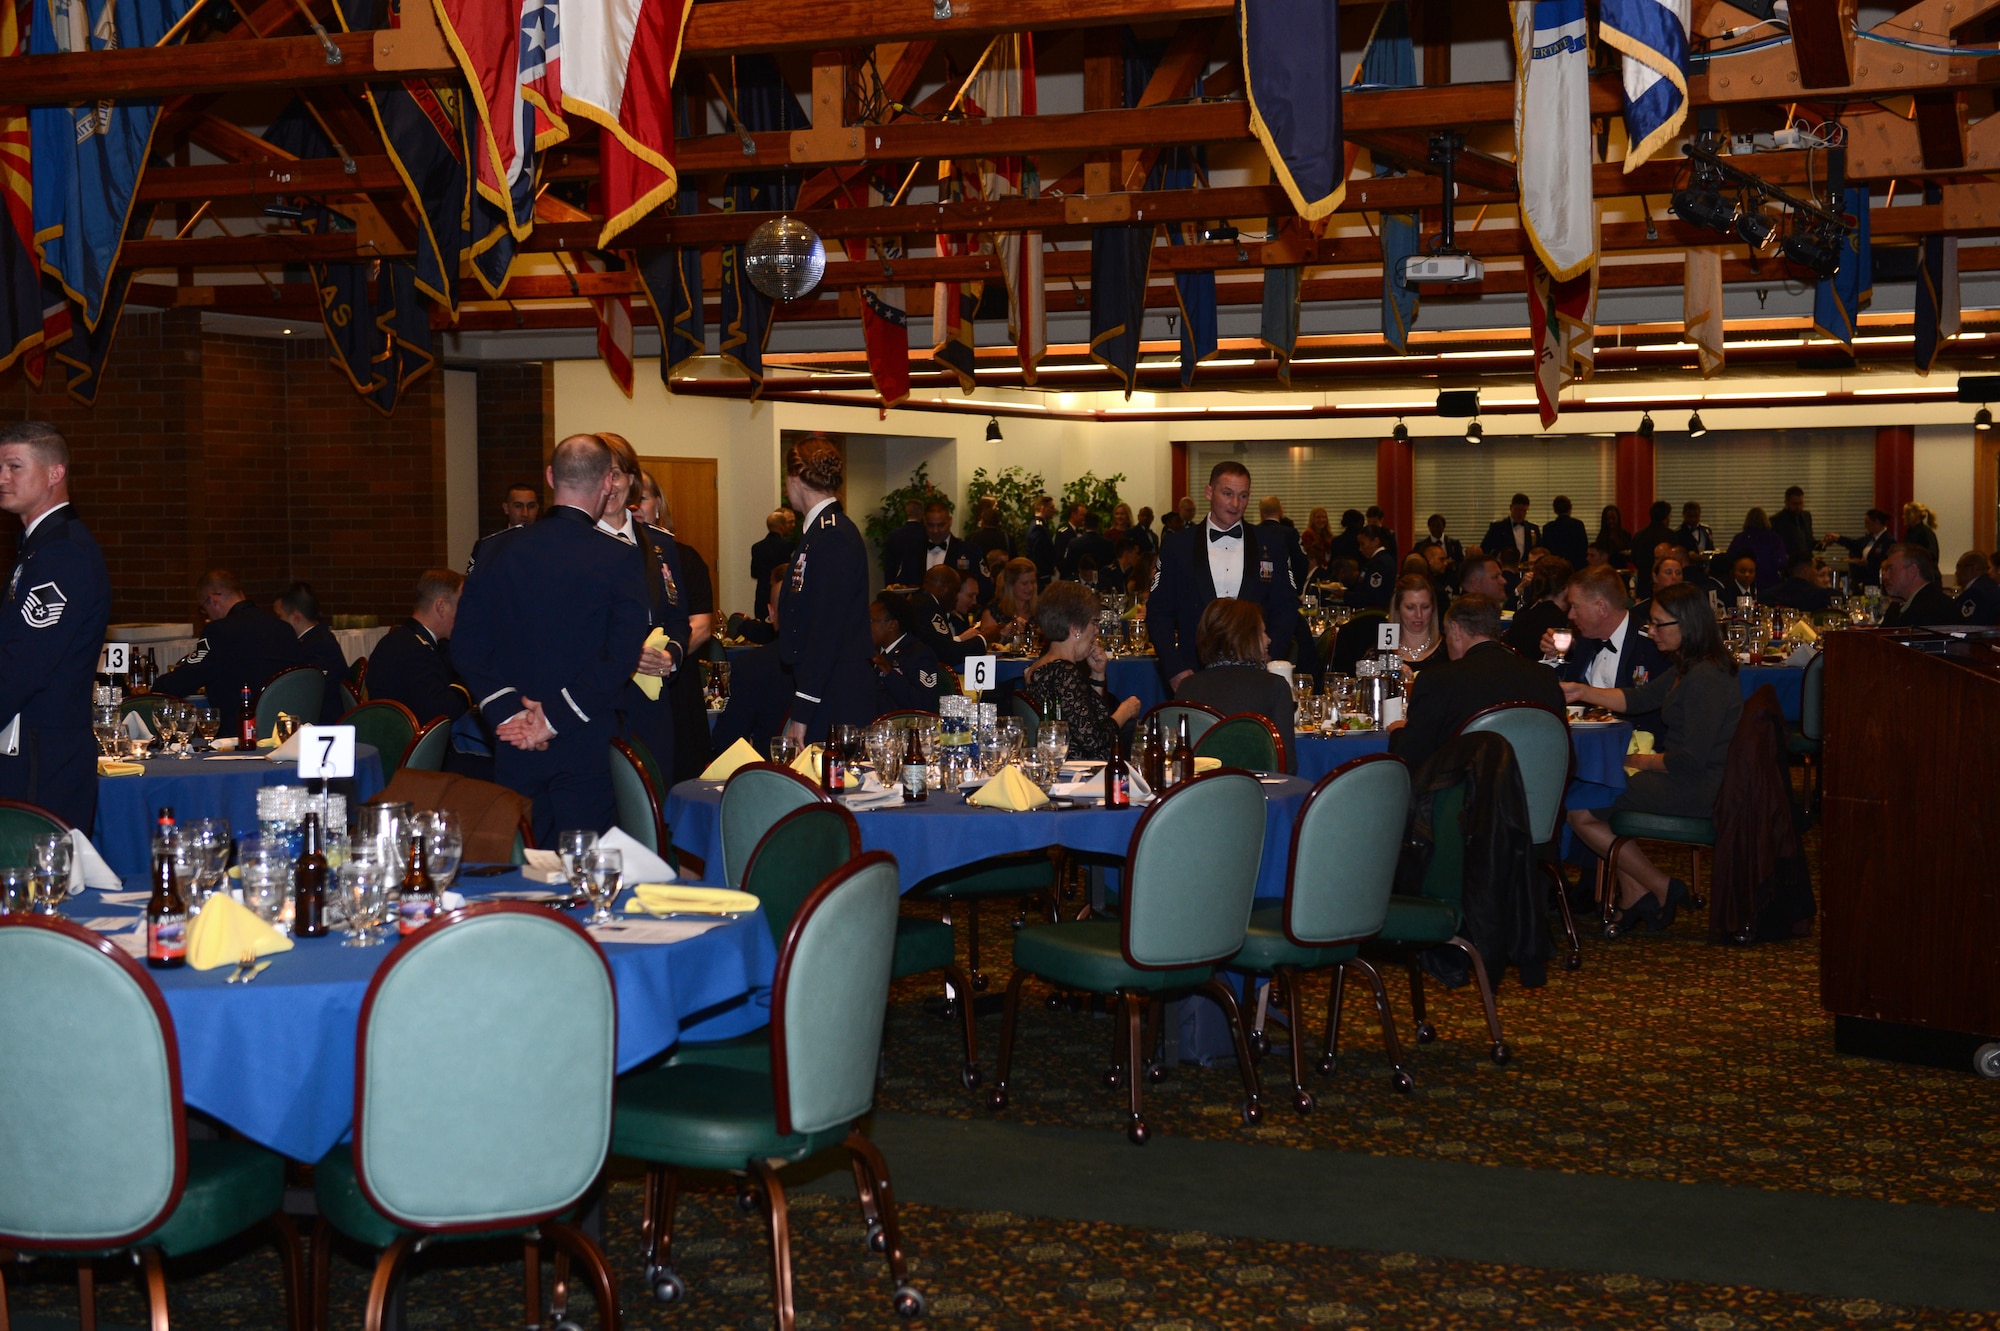 Members of Team McChord attend the 2017 Annual Awards Banquet at the McChord Field Club on Joint Base Lewis-McChord, Wash., Feb. 23, 2018. The event publicly recognized members of Team McChord for their excellence throughout the year.